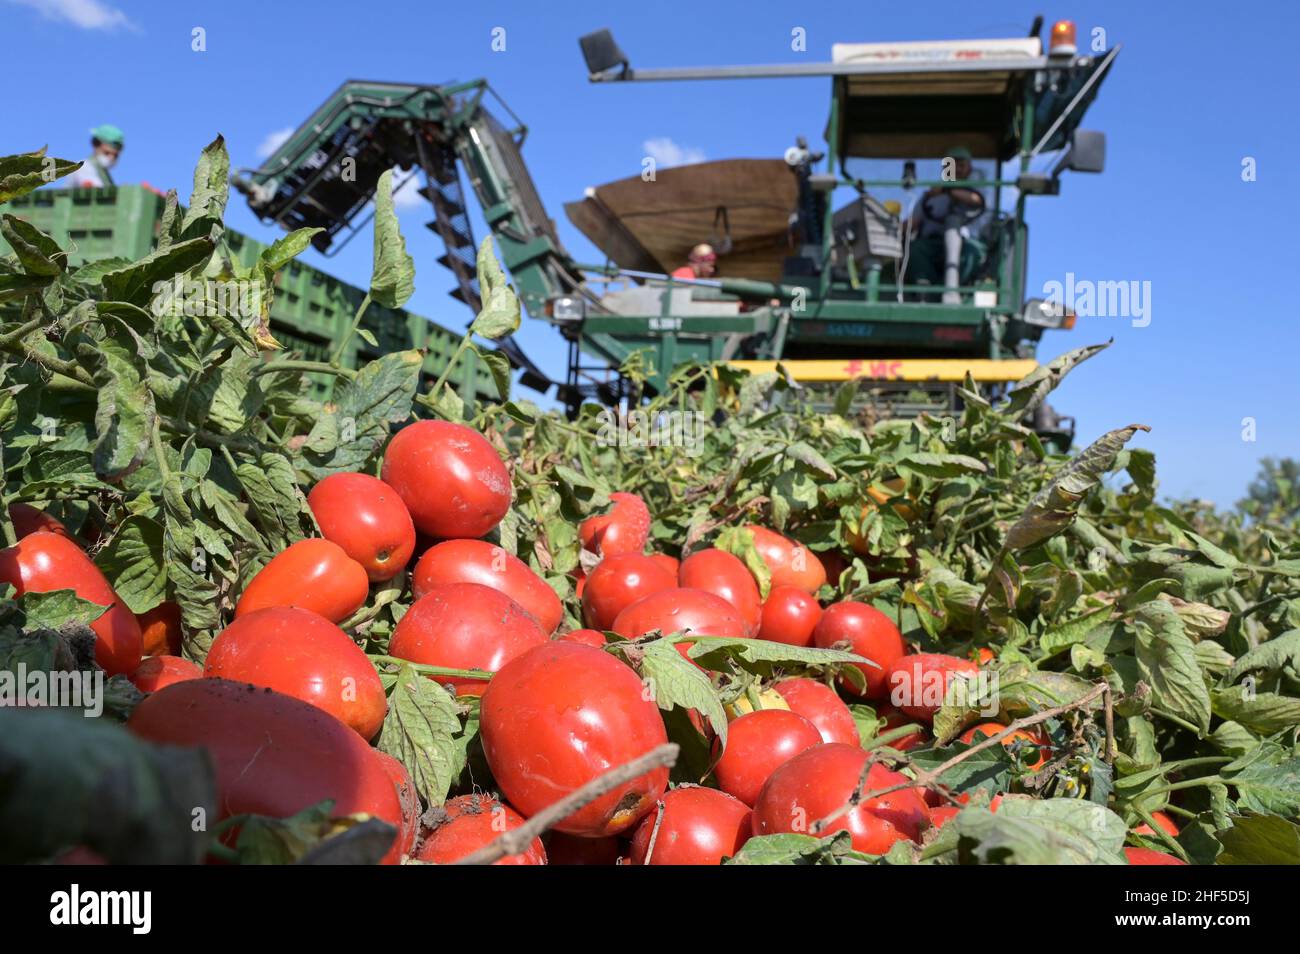 ITALY, Parma, tomato contract farming for company Mutti s.p.a., harvest with Sandei FMC harvester, the harvested plum tomatoes are processed direct on the field at Insta Factory a mobile conserving unit and used for passata Sul Campo / ITALIEN, Tomaten Vertragsanbau fuer Firma Mutti spa, die geernteten Flaschentomaten werden anschliessend direkt am Feld in der Insta Factory, einer mobilen Konservierung, zu Passata Sul Campo verarbeitet und konserviert Stock Photo